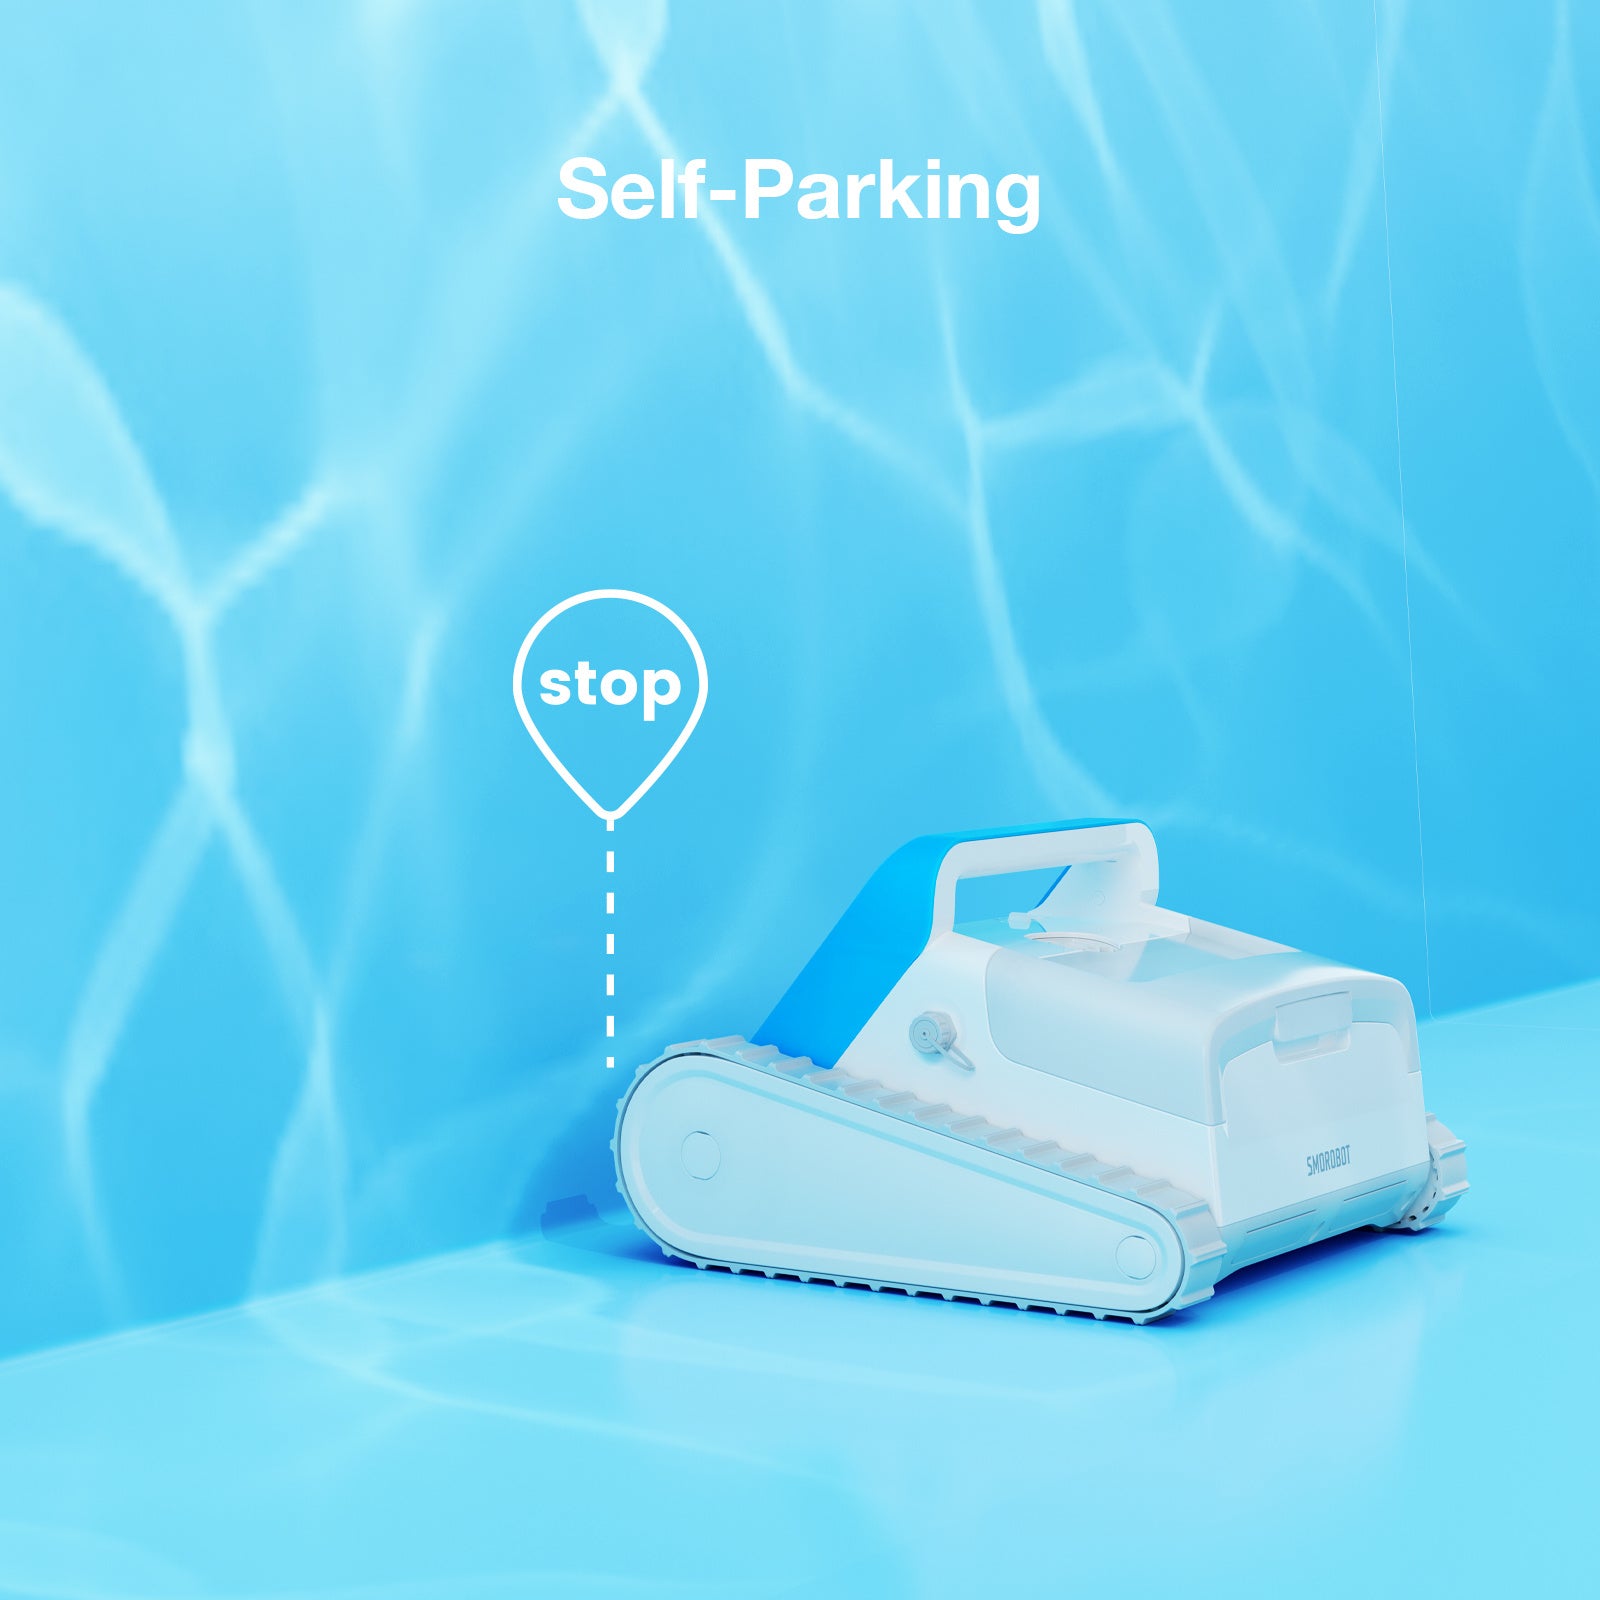 A compact, blue-and-white robotic pool cleaner with tank-like treads and a brush roller on its underside. The brand name "SMOROBOT Cordless Robotic Pool Cleaner – Automatic Wall Climbing Pool Vacuum Cleaner, Smart Navigation, Self-Parking, Lasts 150 Mins with 130W Suction Power, Ideal for In-Ground Pools up to 2500 ft²" is printed on its front. This wall climbing robot ensures every inch of your pool is spotless.